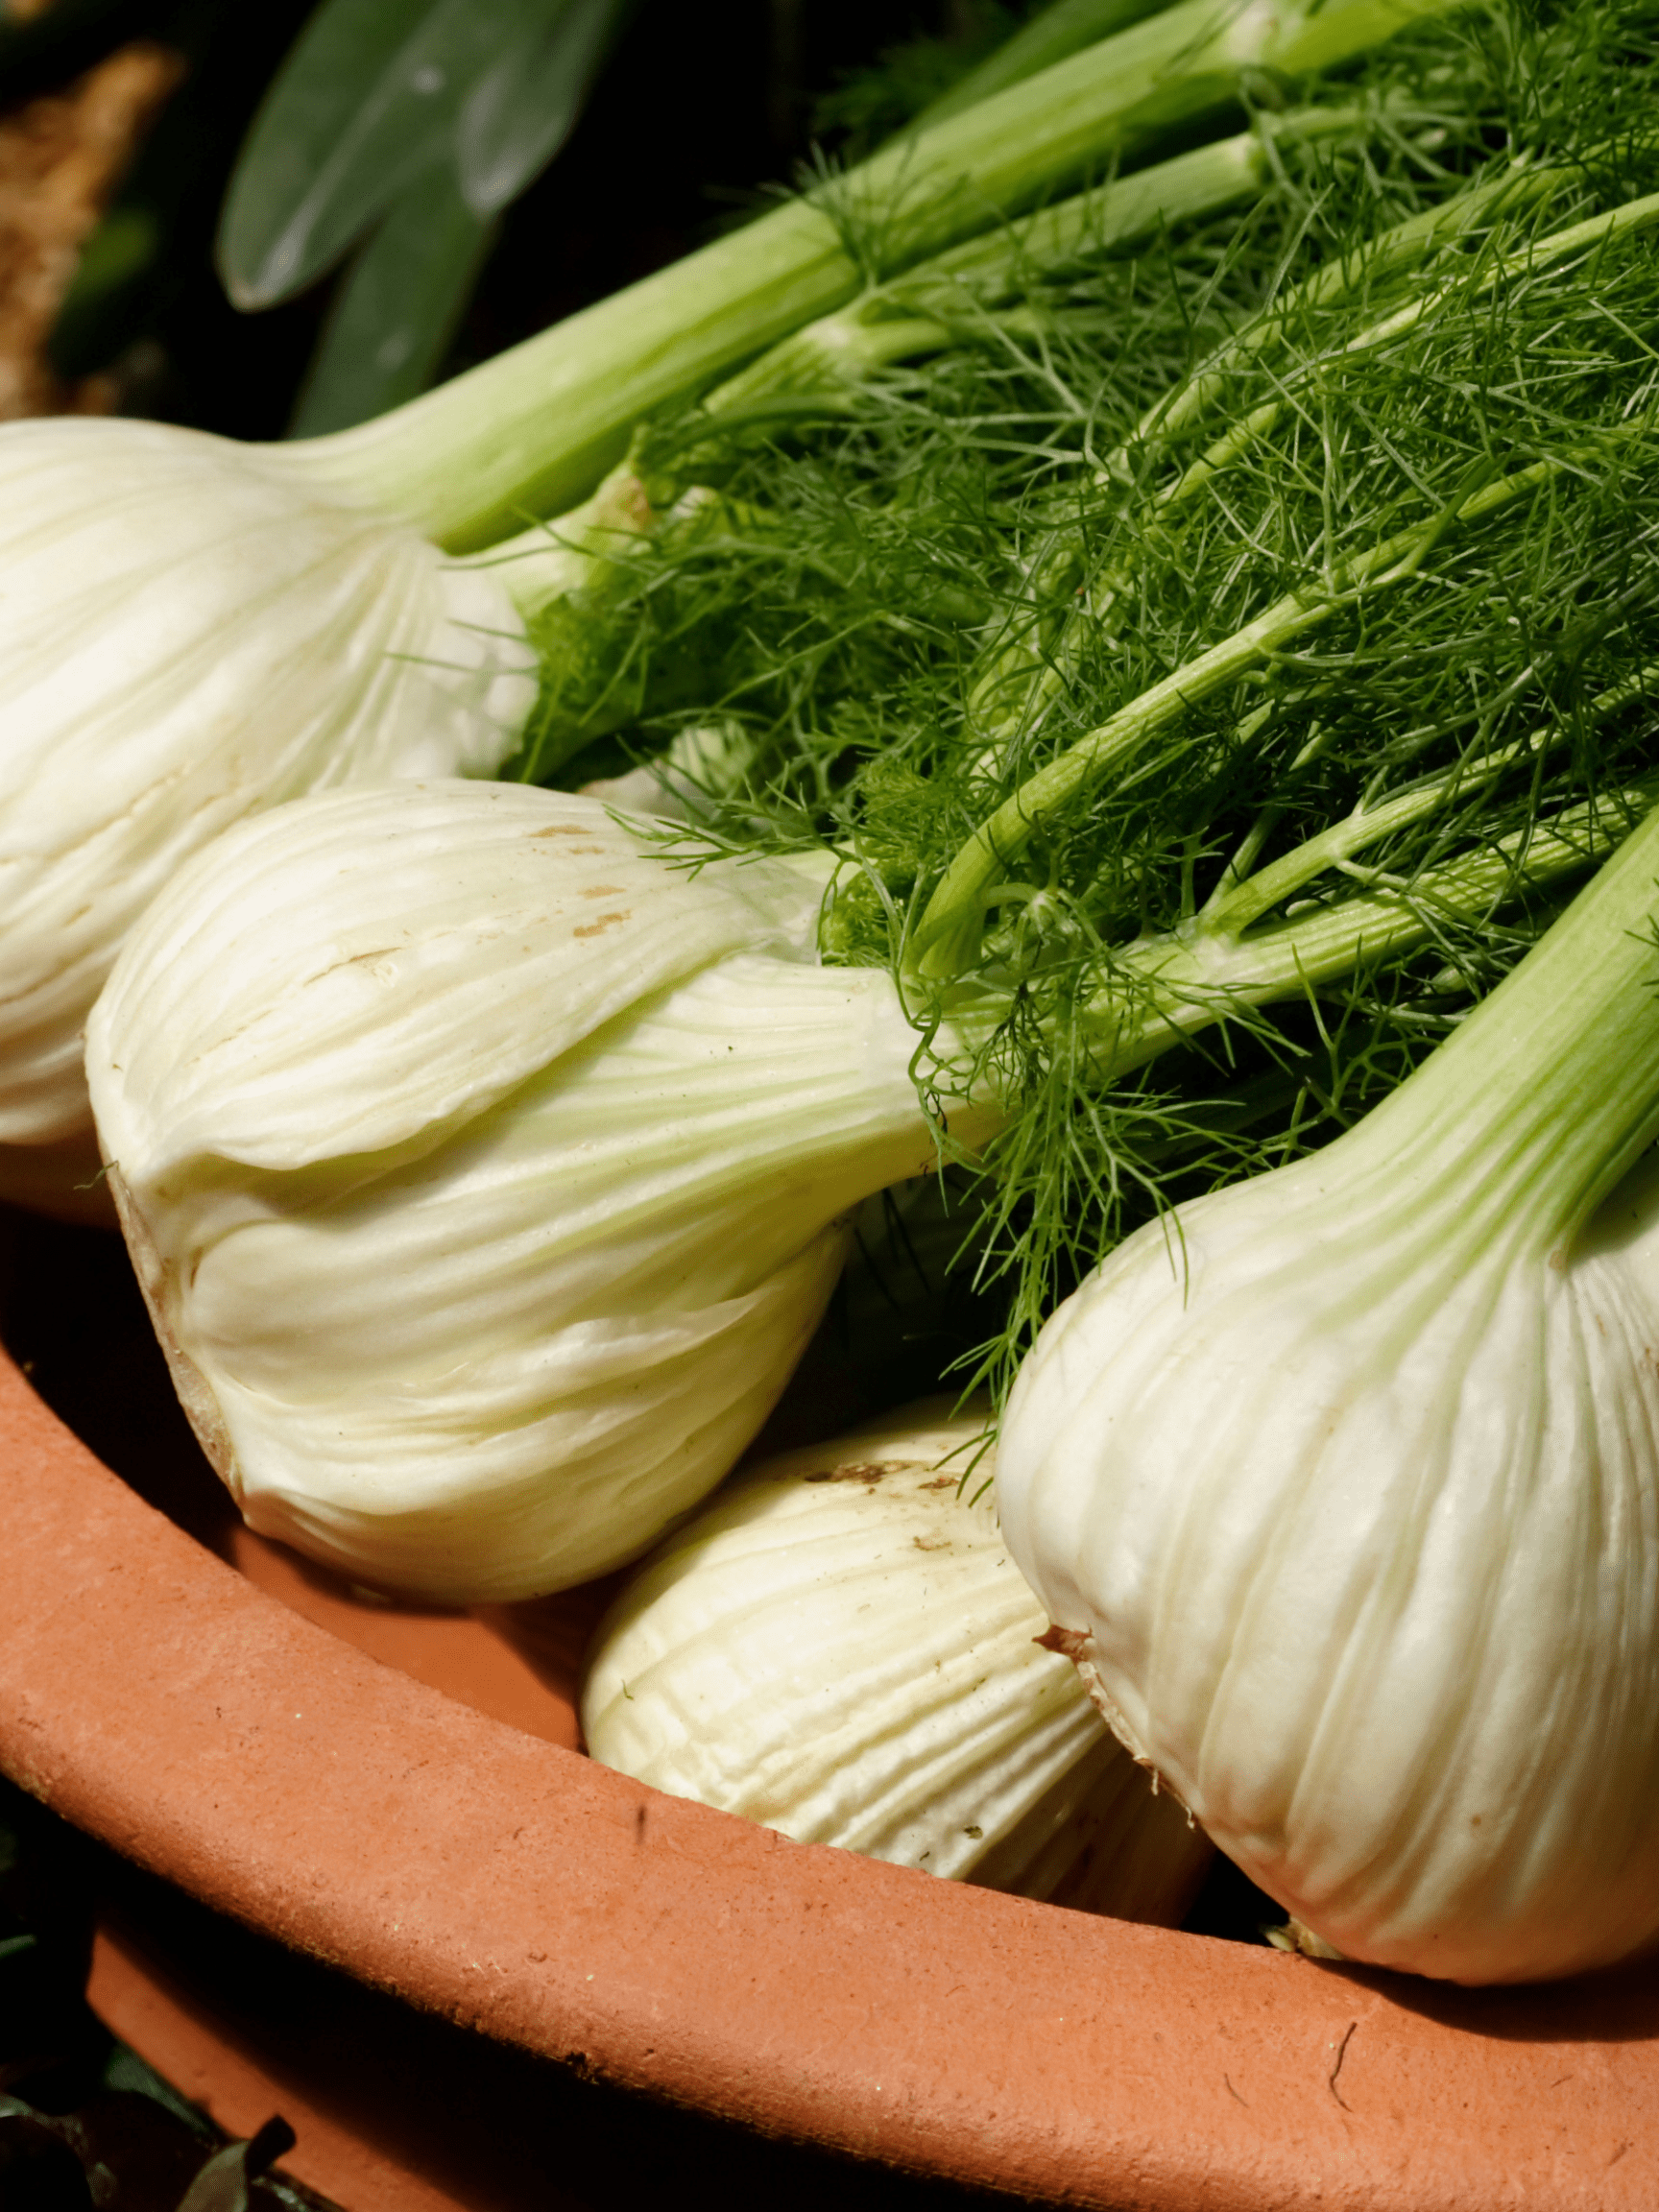 Fennel with bulbs and tops in a terracotta dish.